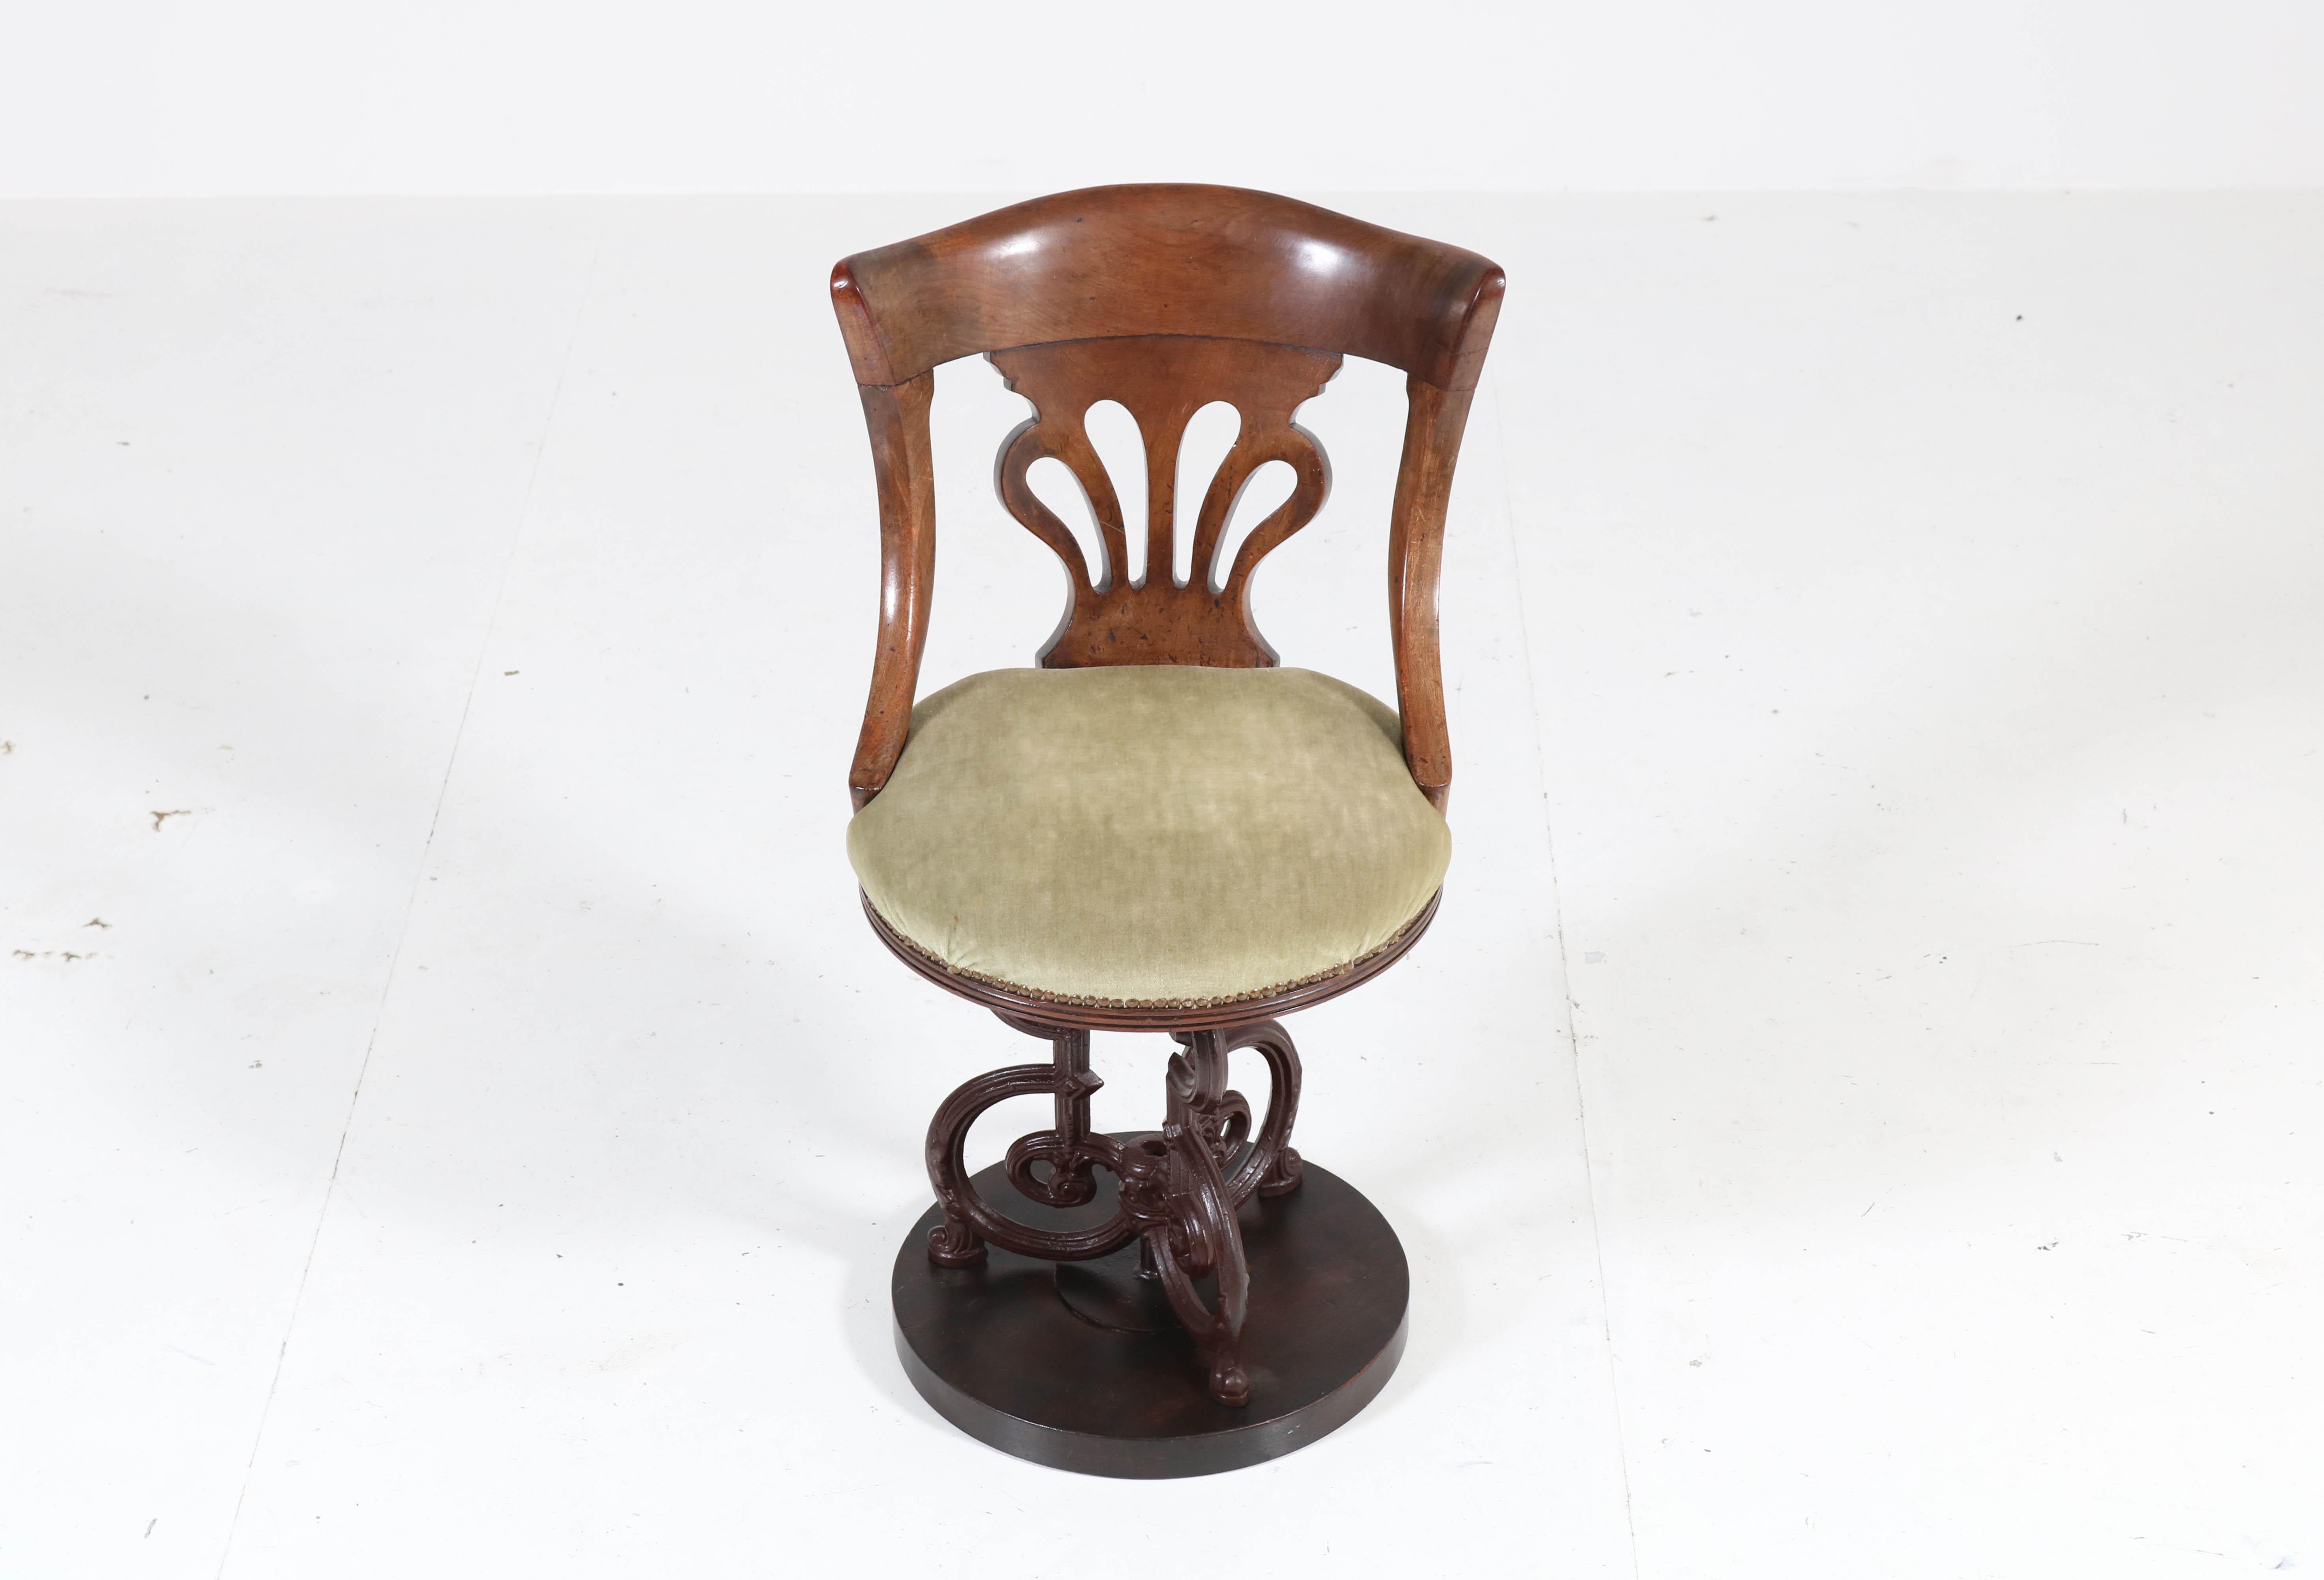 Stunning and rare nautical captains swivel chair.
Striking English design from the 1880s.
Solid mahogany on an original cast iron base.
The tufted round seat is upholstered with green velvet.
In good original condition with minor wear consistent